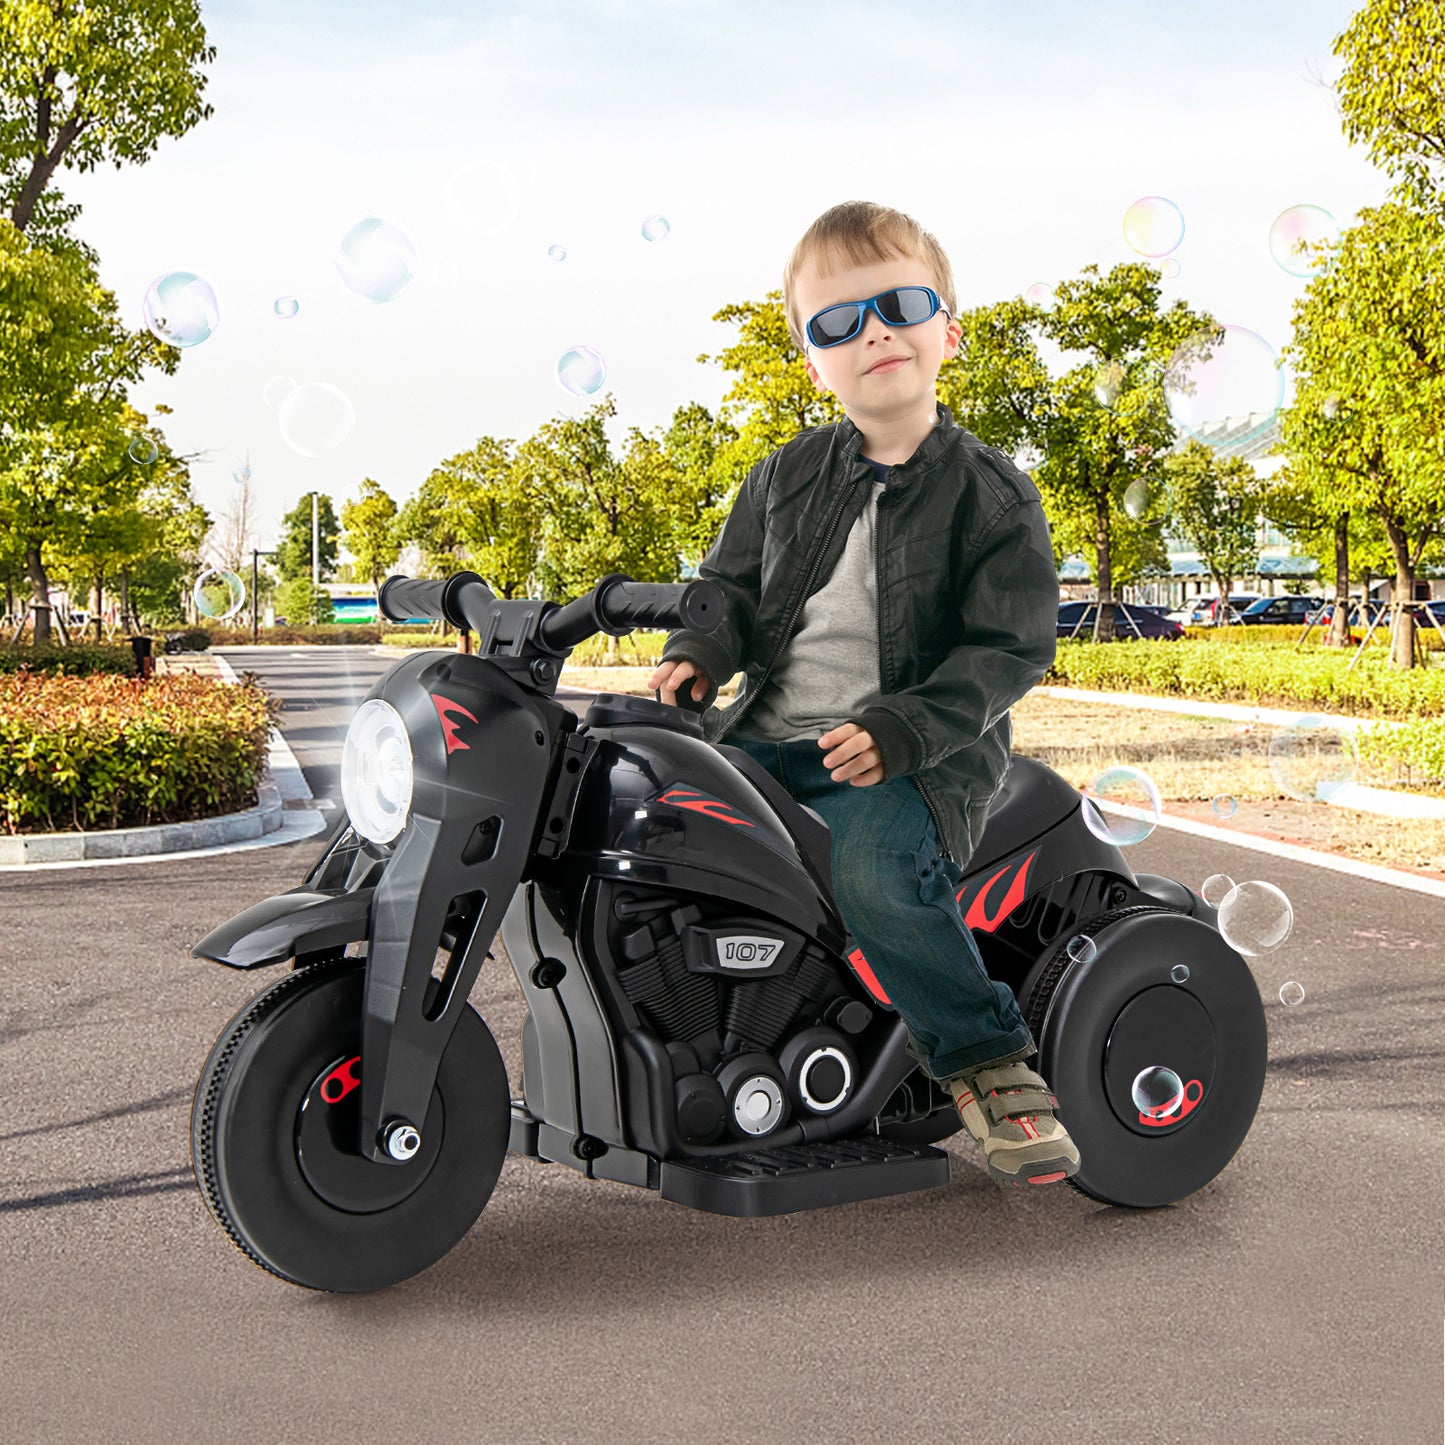 OLAKIDS Kids Motorcycle, 6V Electric Ride On Car with Automatic Bubble Function, Foot Pedal, Headlight, Music, 3 Anti-Skip Wheels Vehicle for Children, Toddler Ages 3+